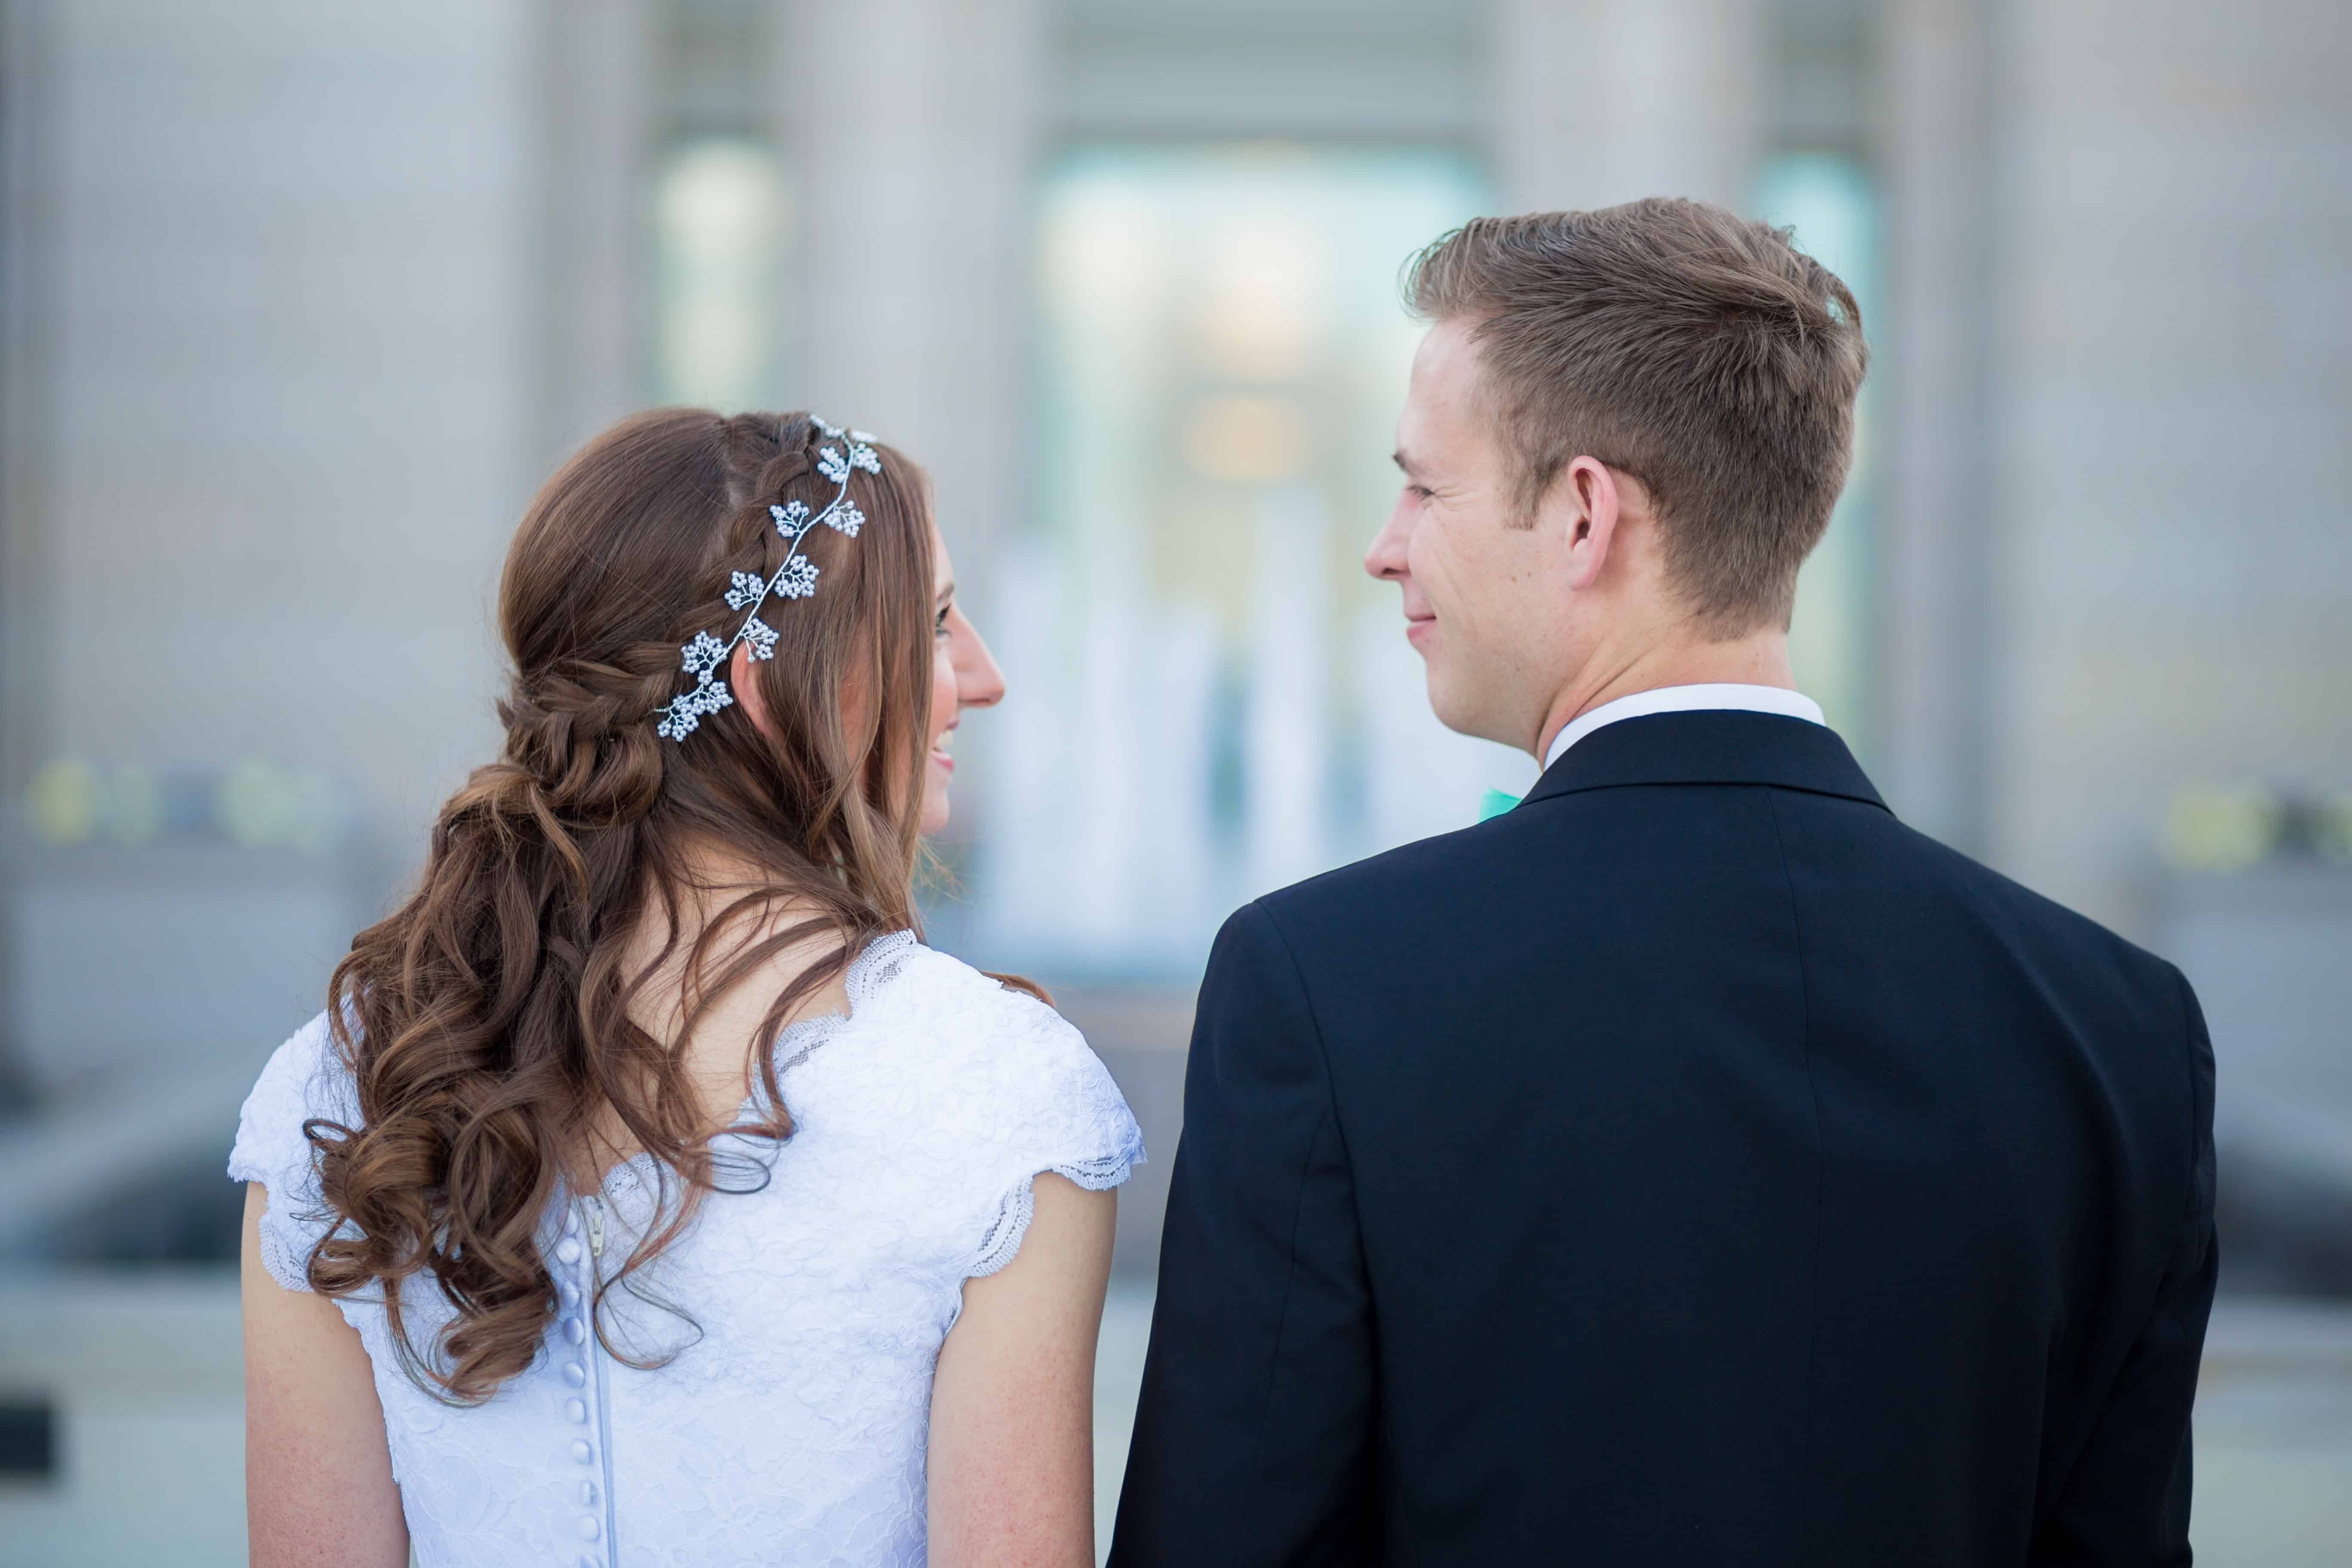 10 Common Wedding Vow Mistakes You'll Want to Avoid 19